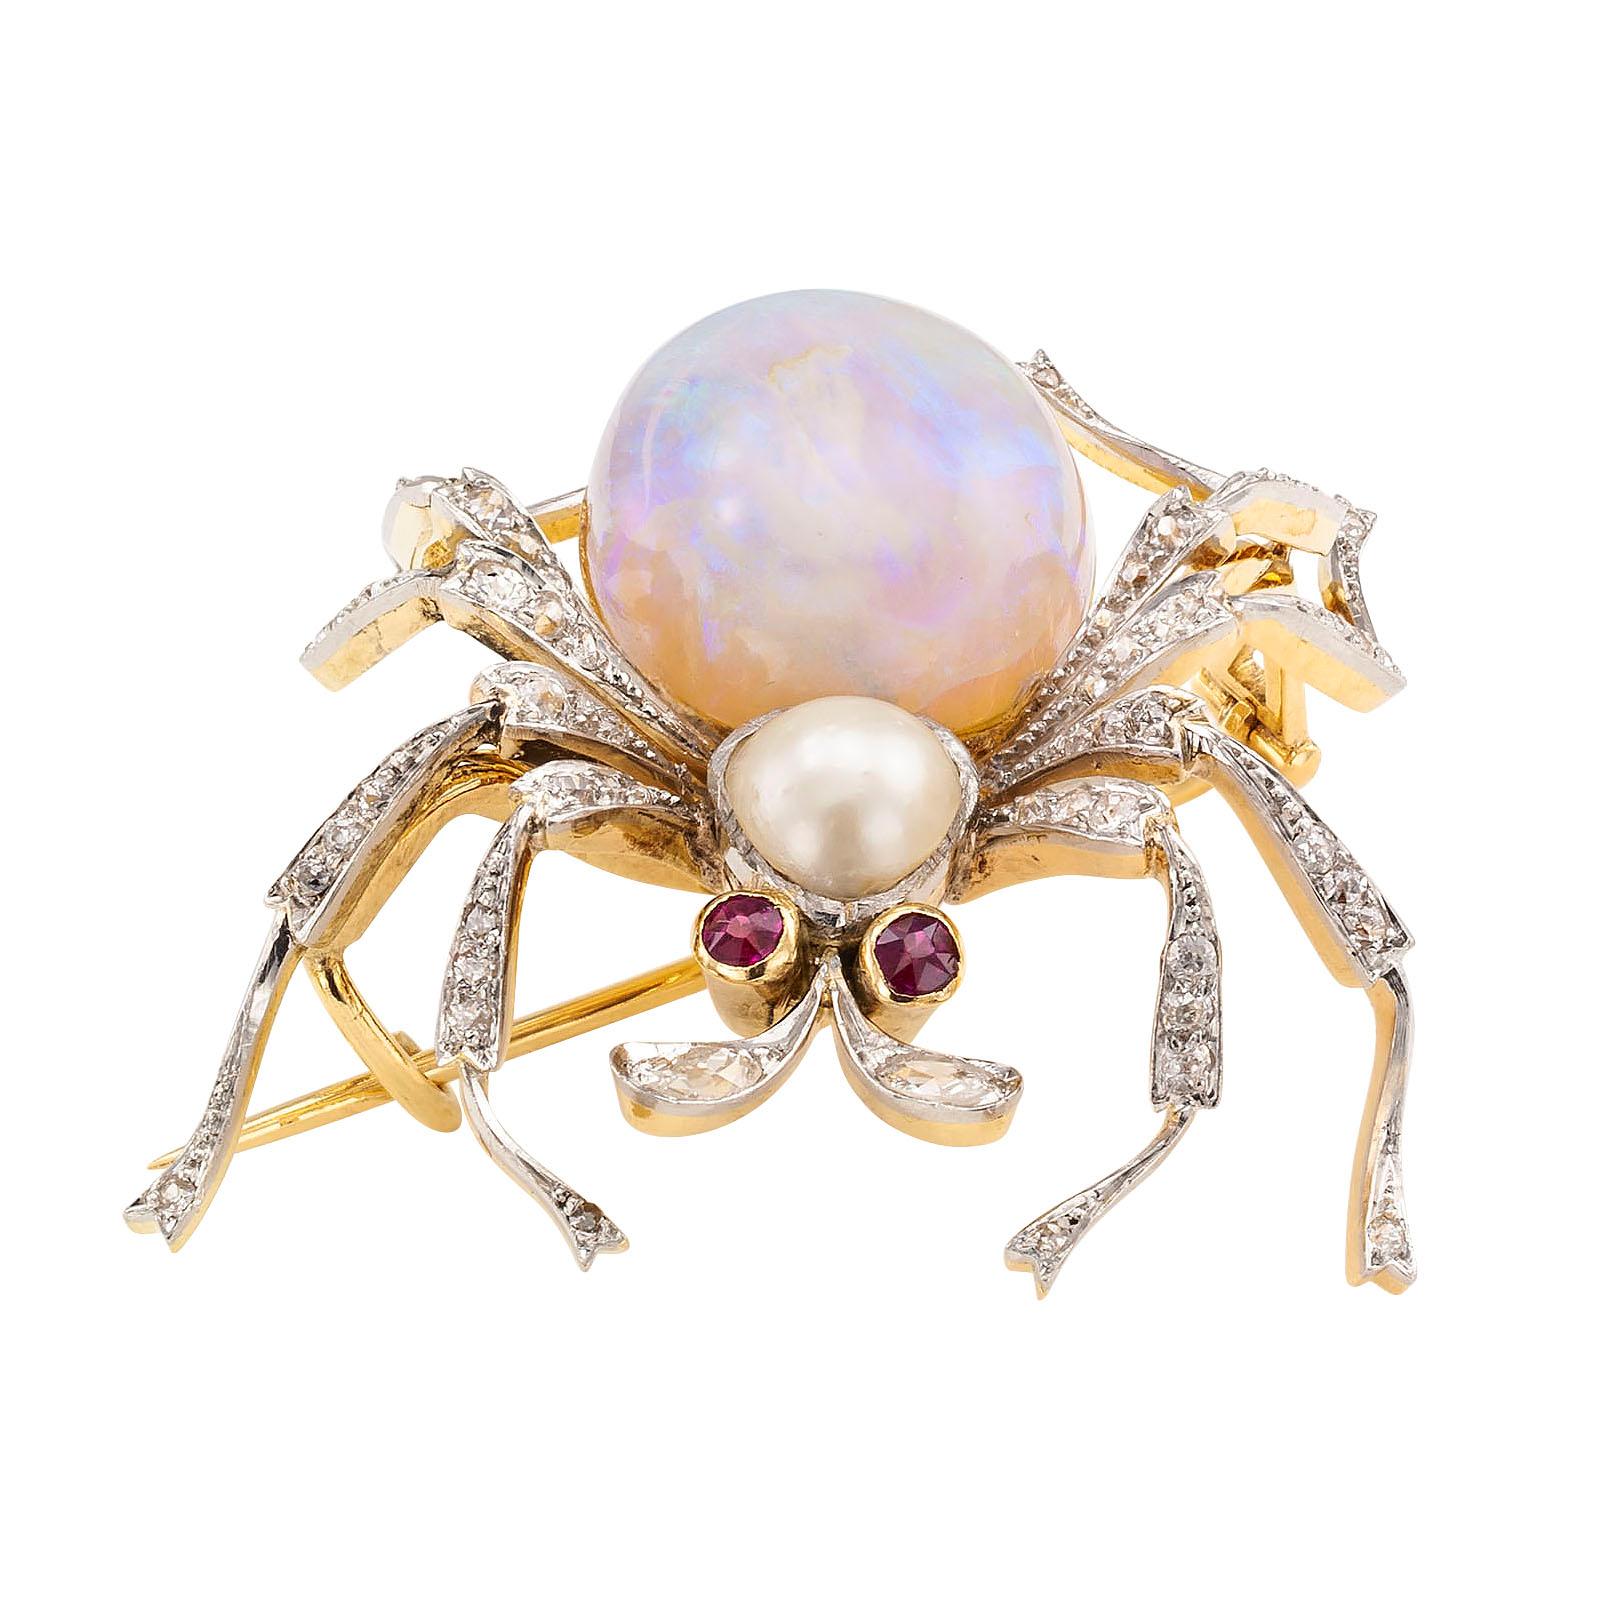 Antique opal diamond ruby pearl gold and platinum spider brooch circa 1900.

DETAILS:
Antique gem-set spider brooch mounted in platinum and gold.
GEMSTONES: two round rubies, one large oval opal and one pearl.
DIAMONDS: fifty-eight round diamonds